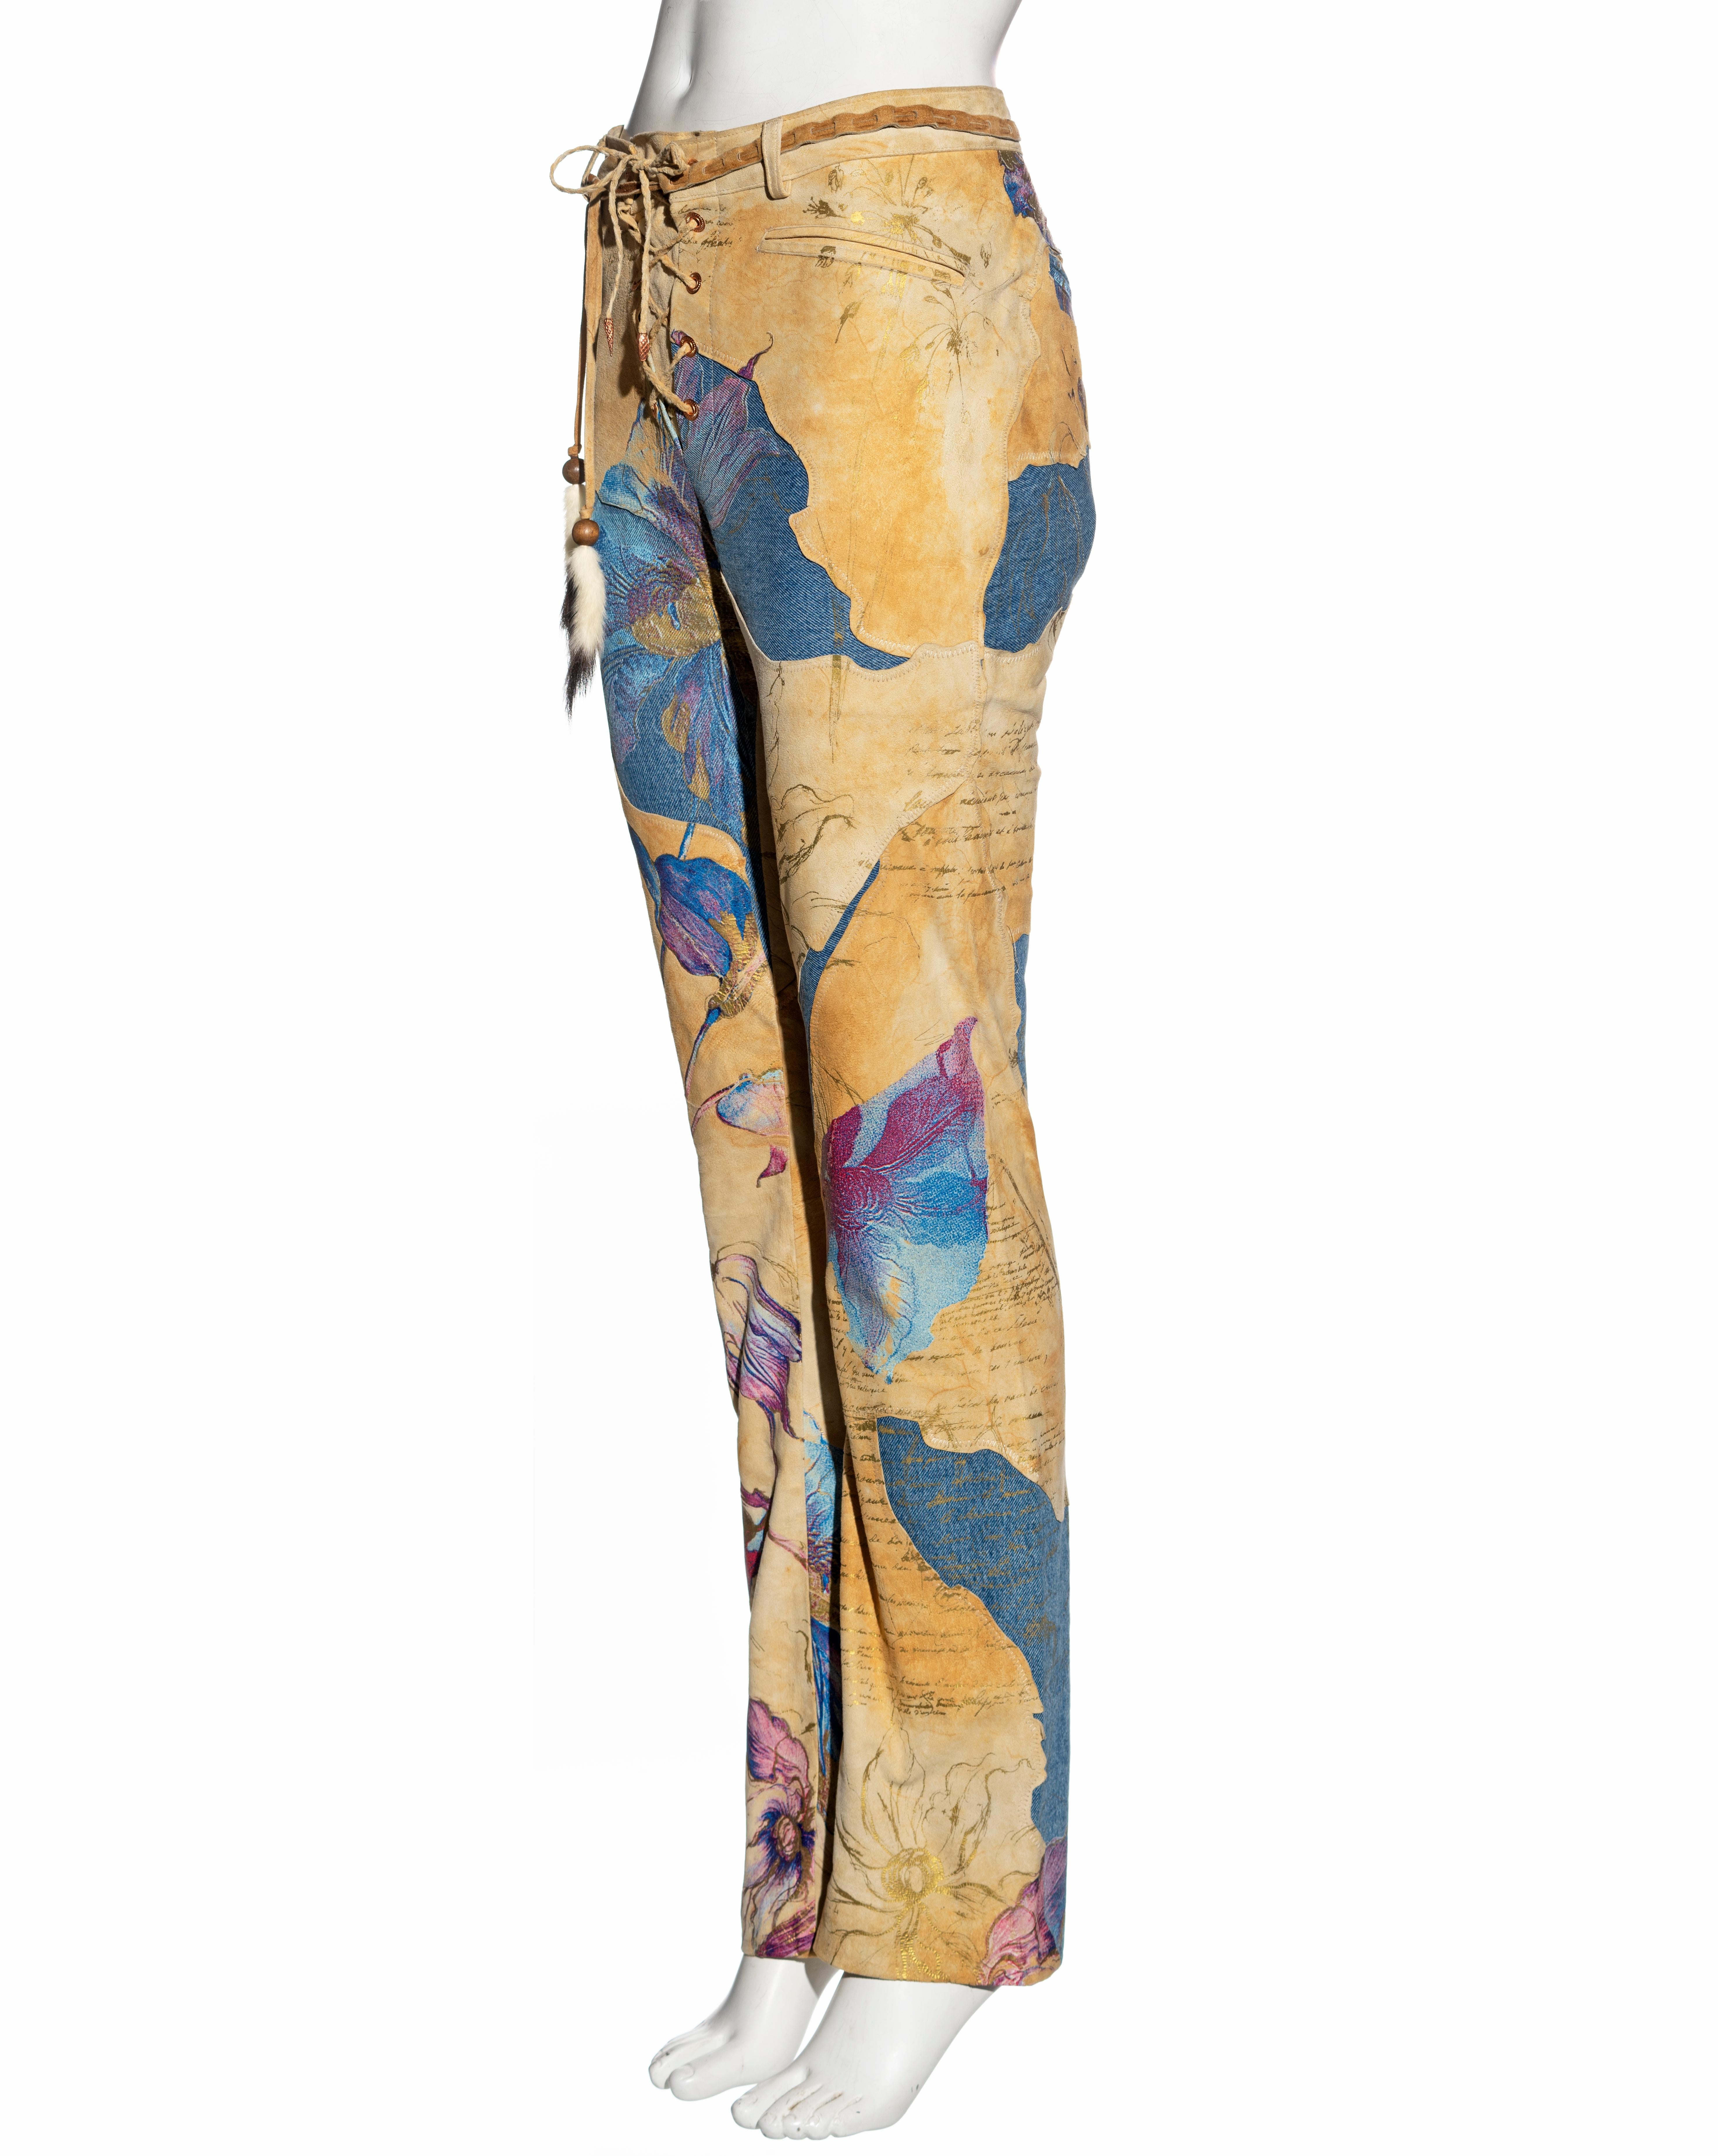 Roberto Cavalli leather and denim patchwork pants with gold foil print, fw 1999 1